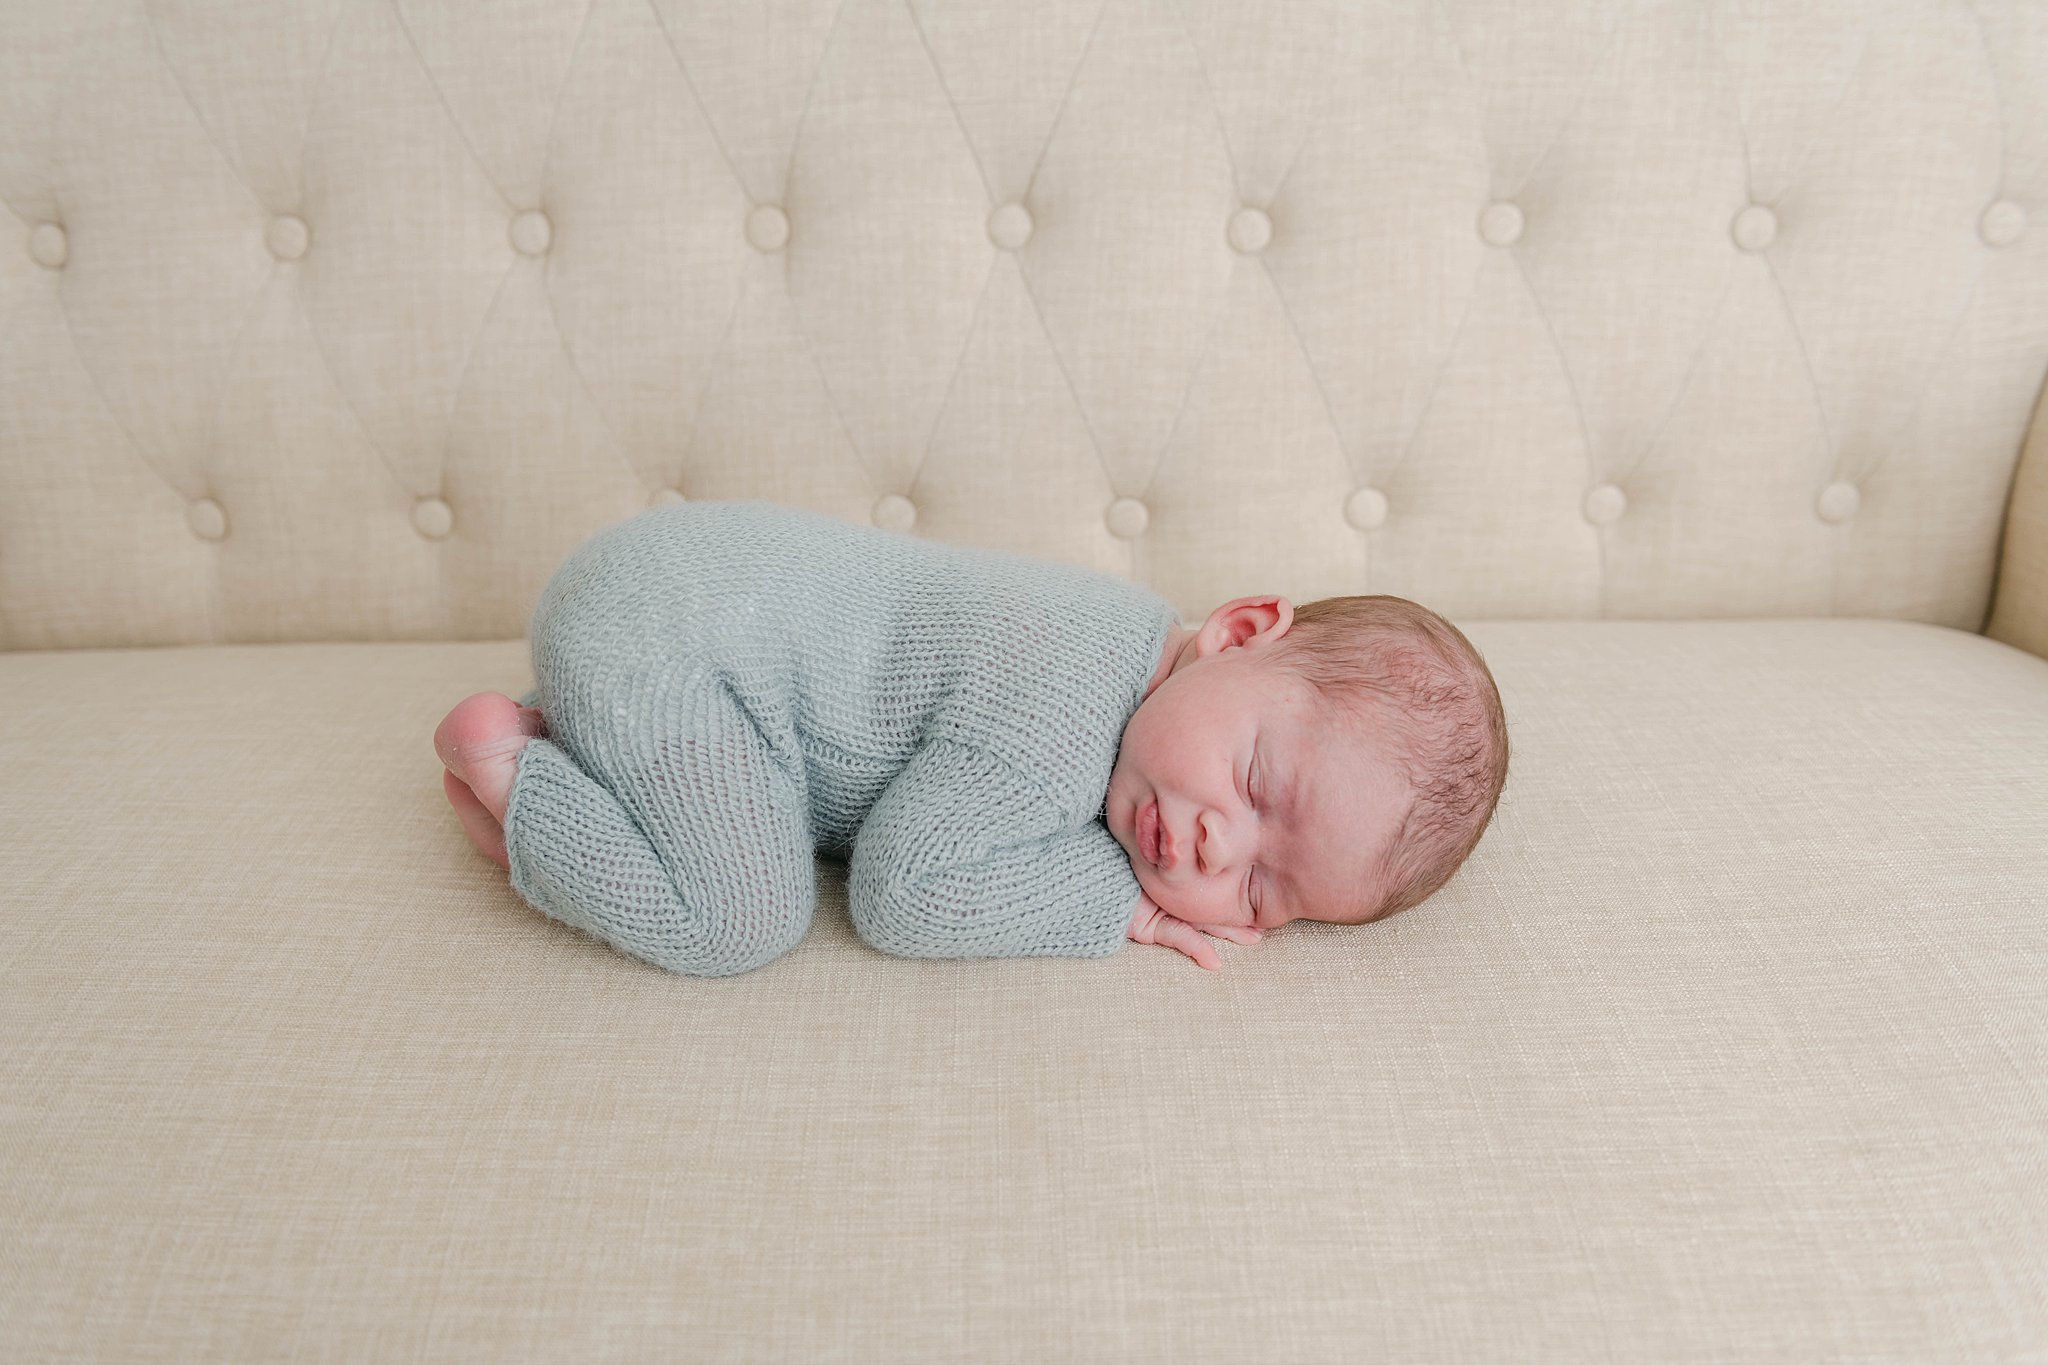 A newborn baby sleeps in a blue knit onesie on its knees and hands on a tan couch before we meet